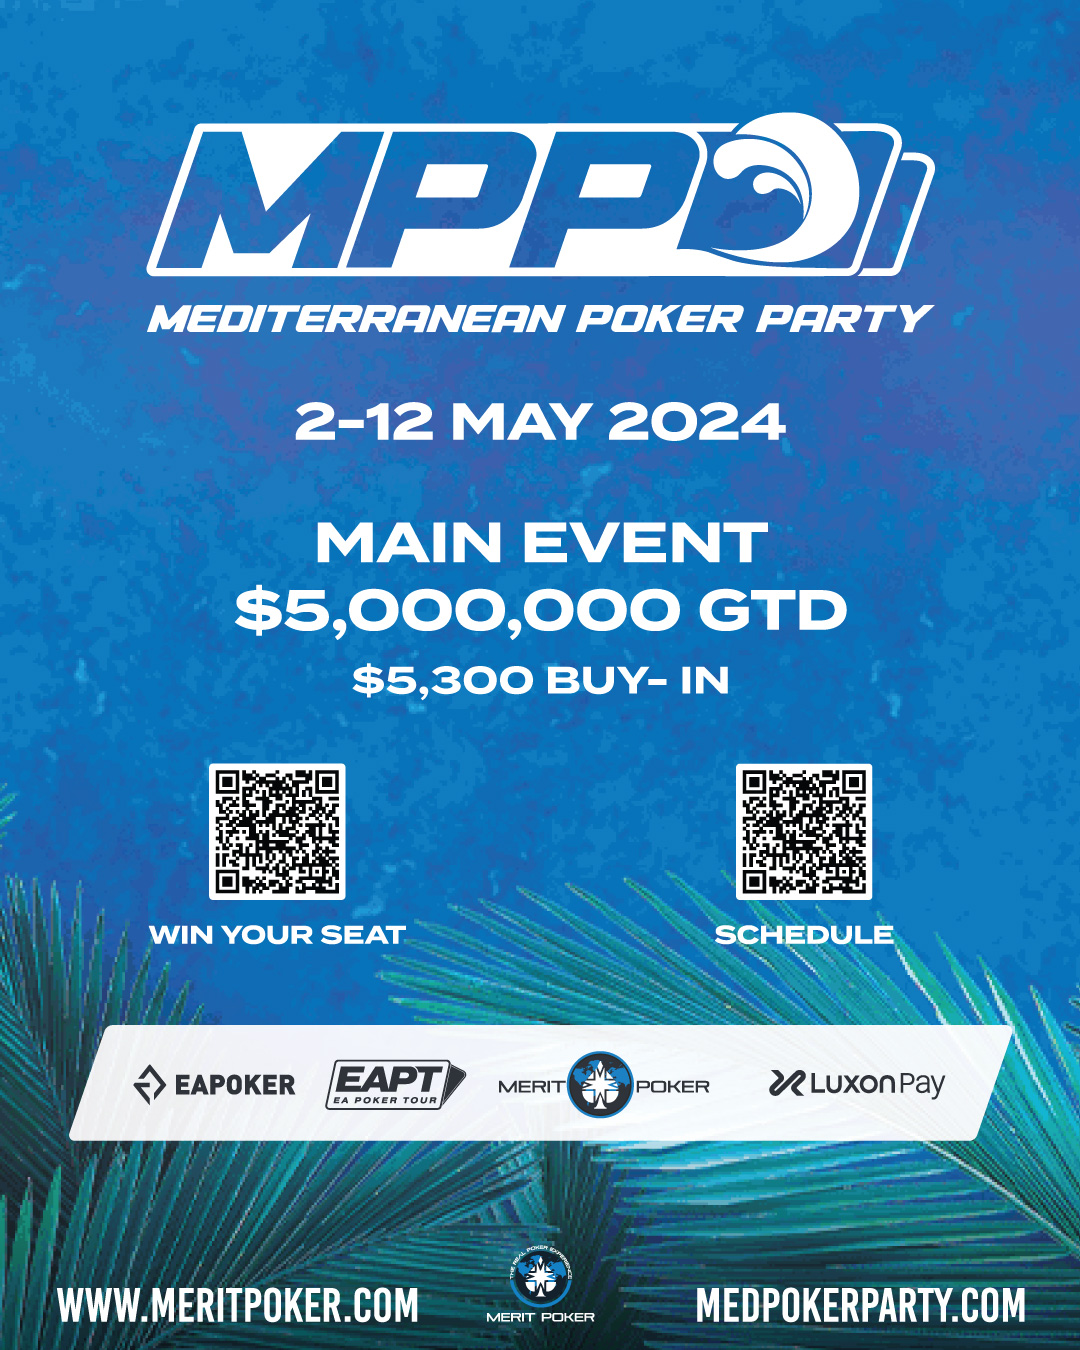 The Mediterranean Poker Party | 02 - 12 MAY 2024 | ME $5.000.000 GTD